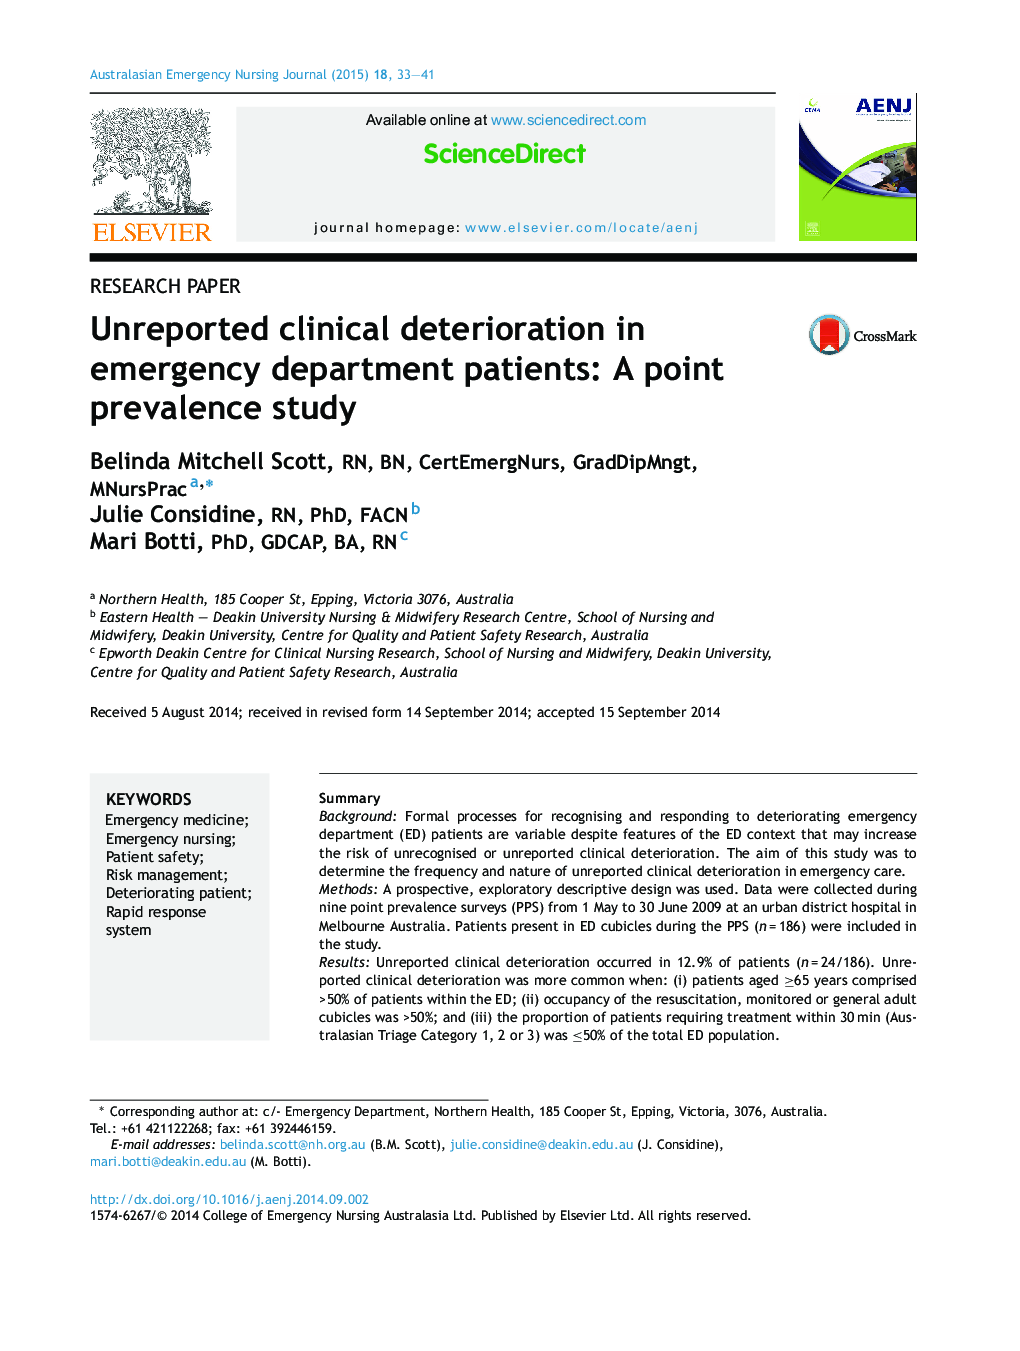 Unreported clinical deterioration in emergency department patients: A point prevalence study